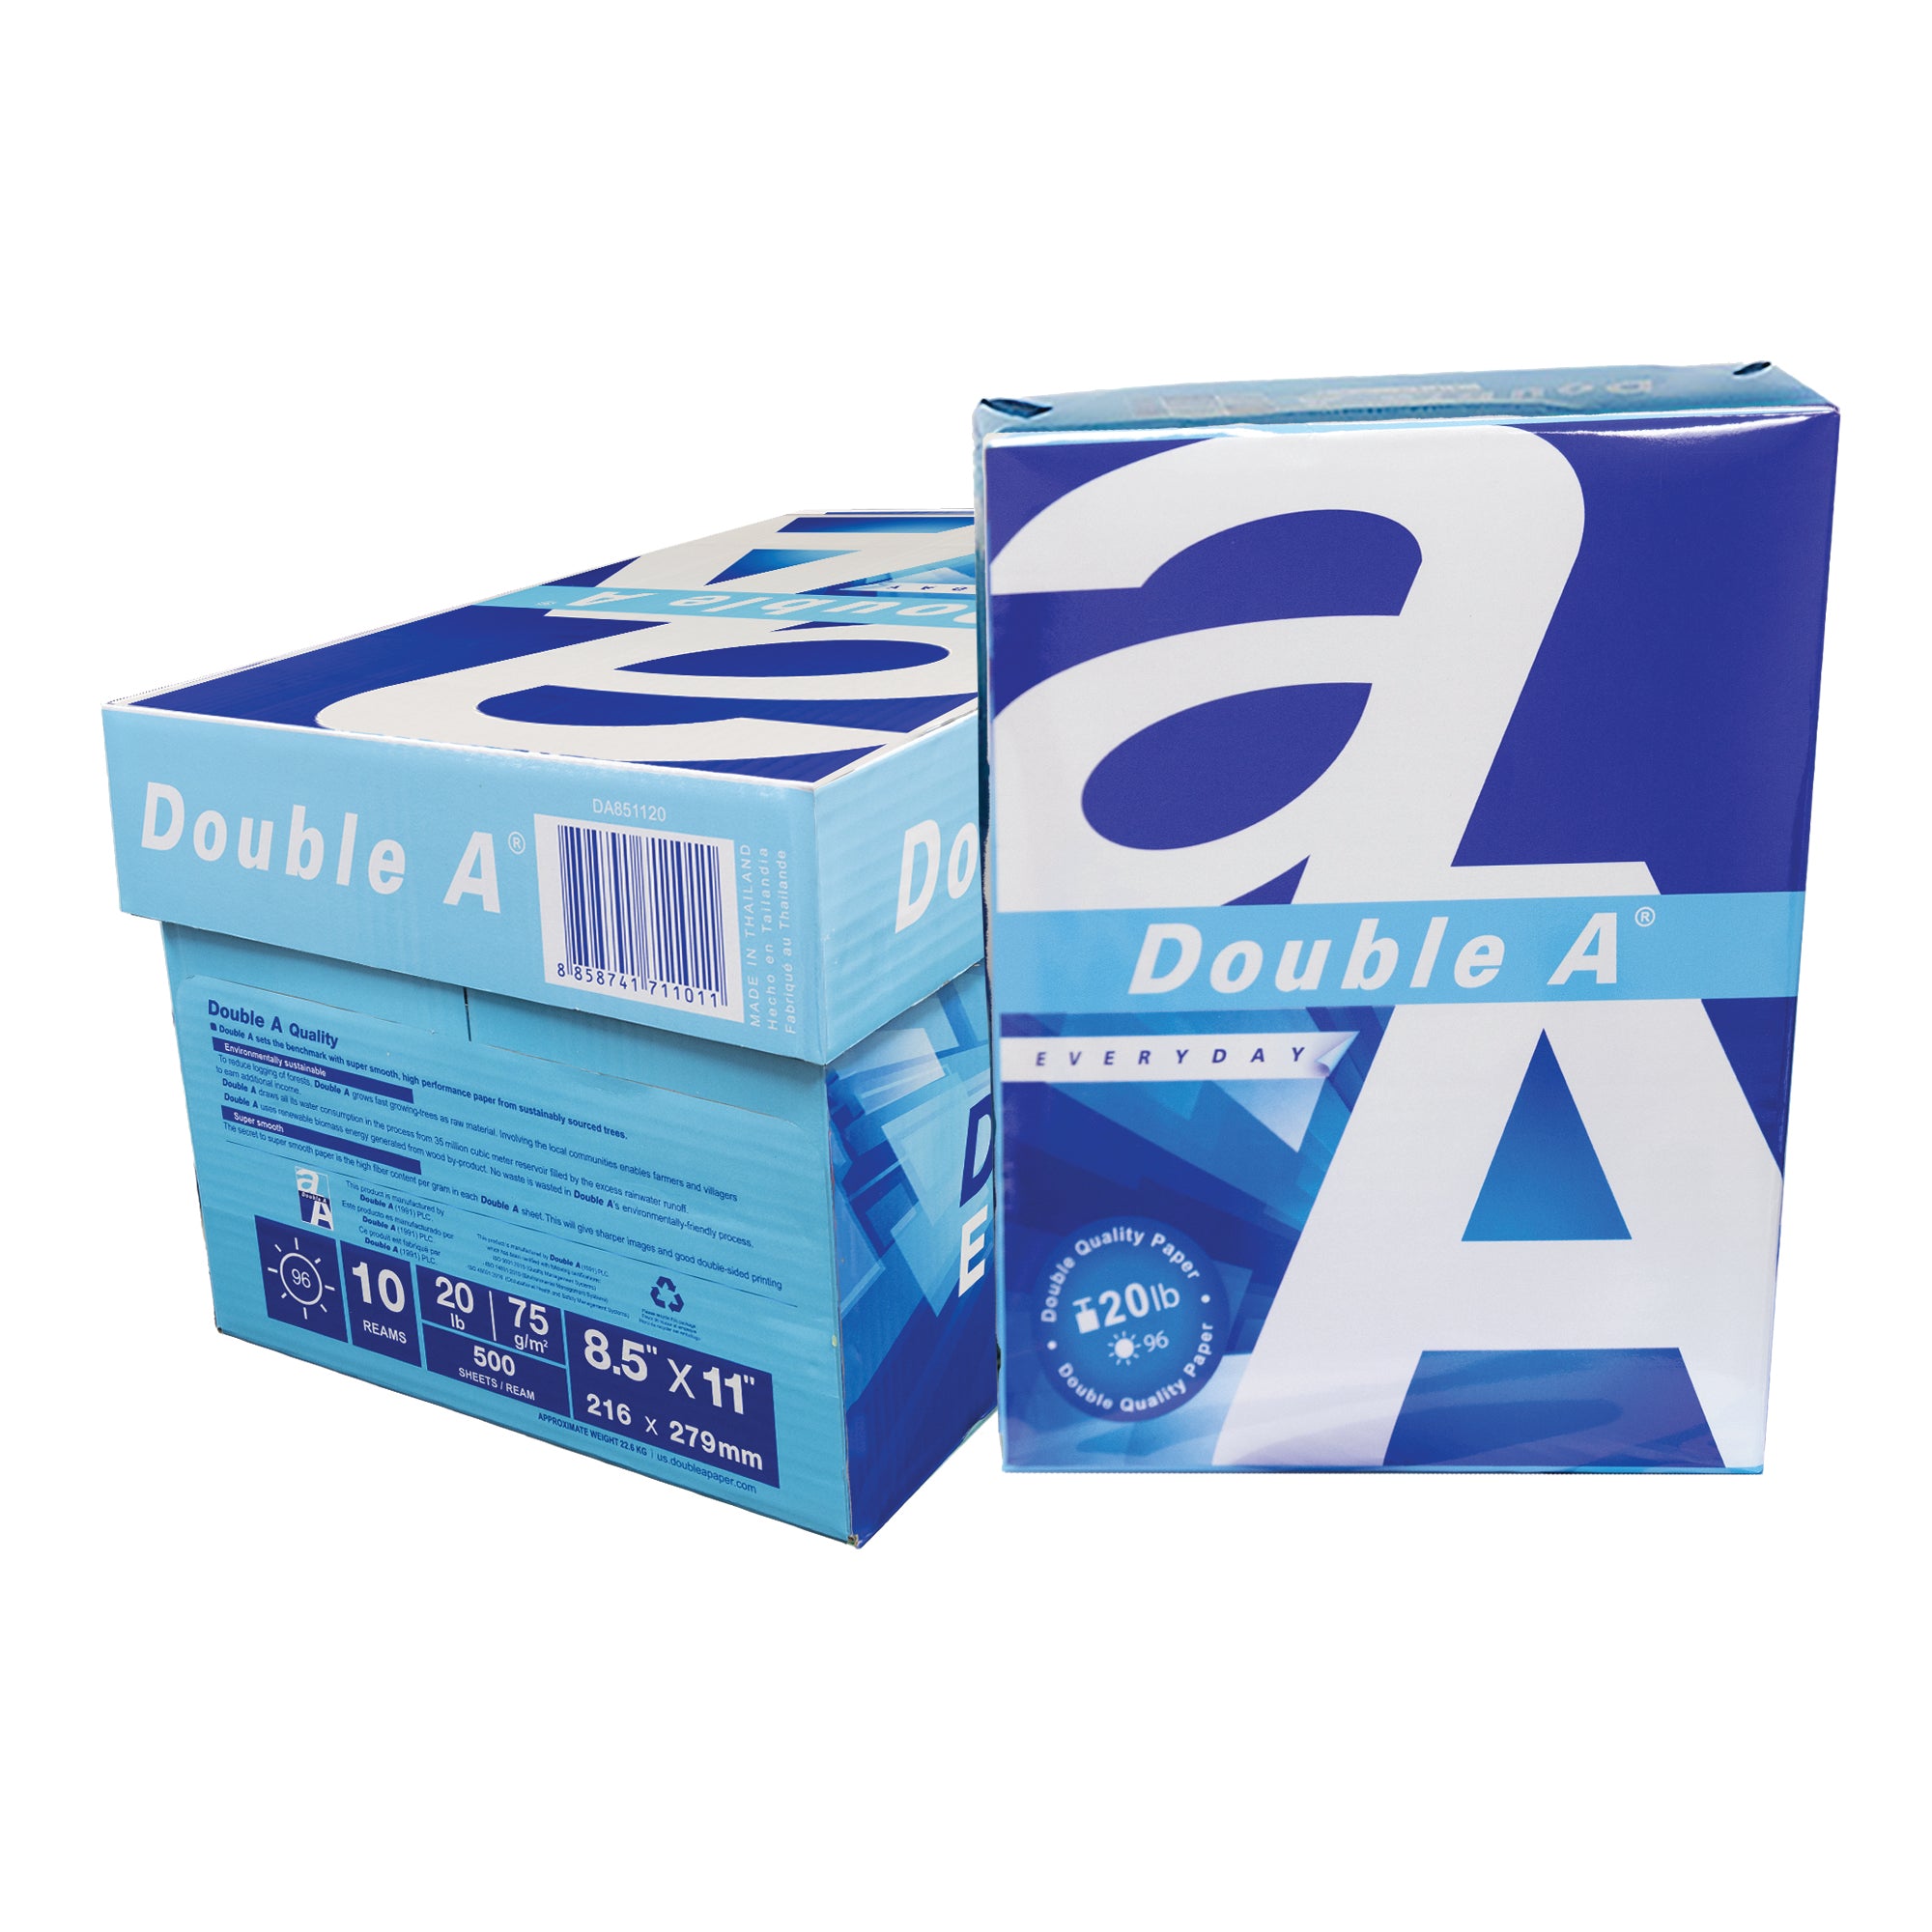 Double A - Printer Copy Paper, Size A4, GSM 80, 500 Pages Ream